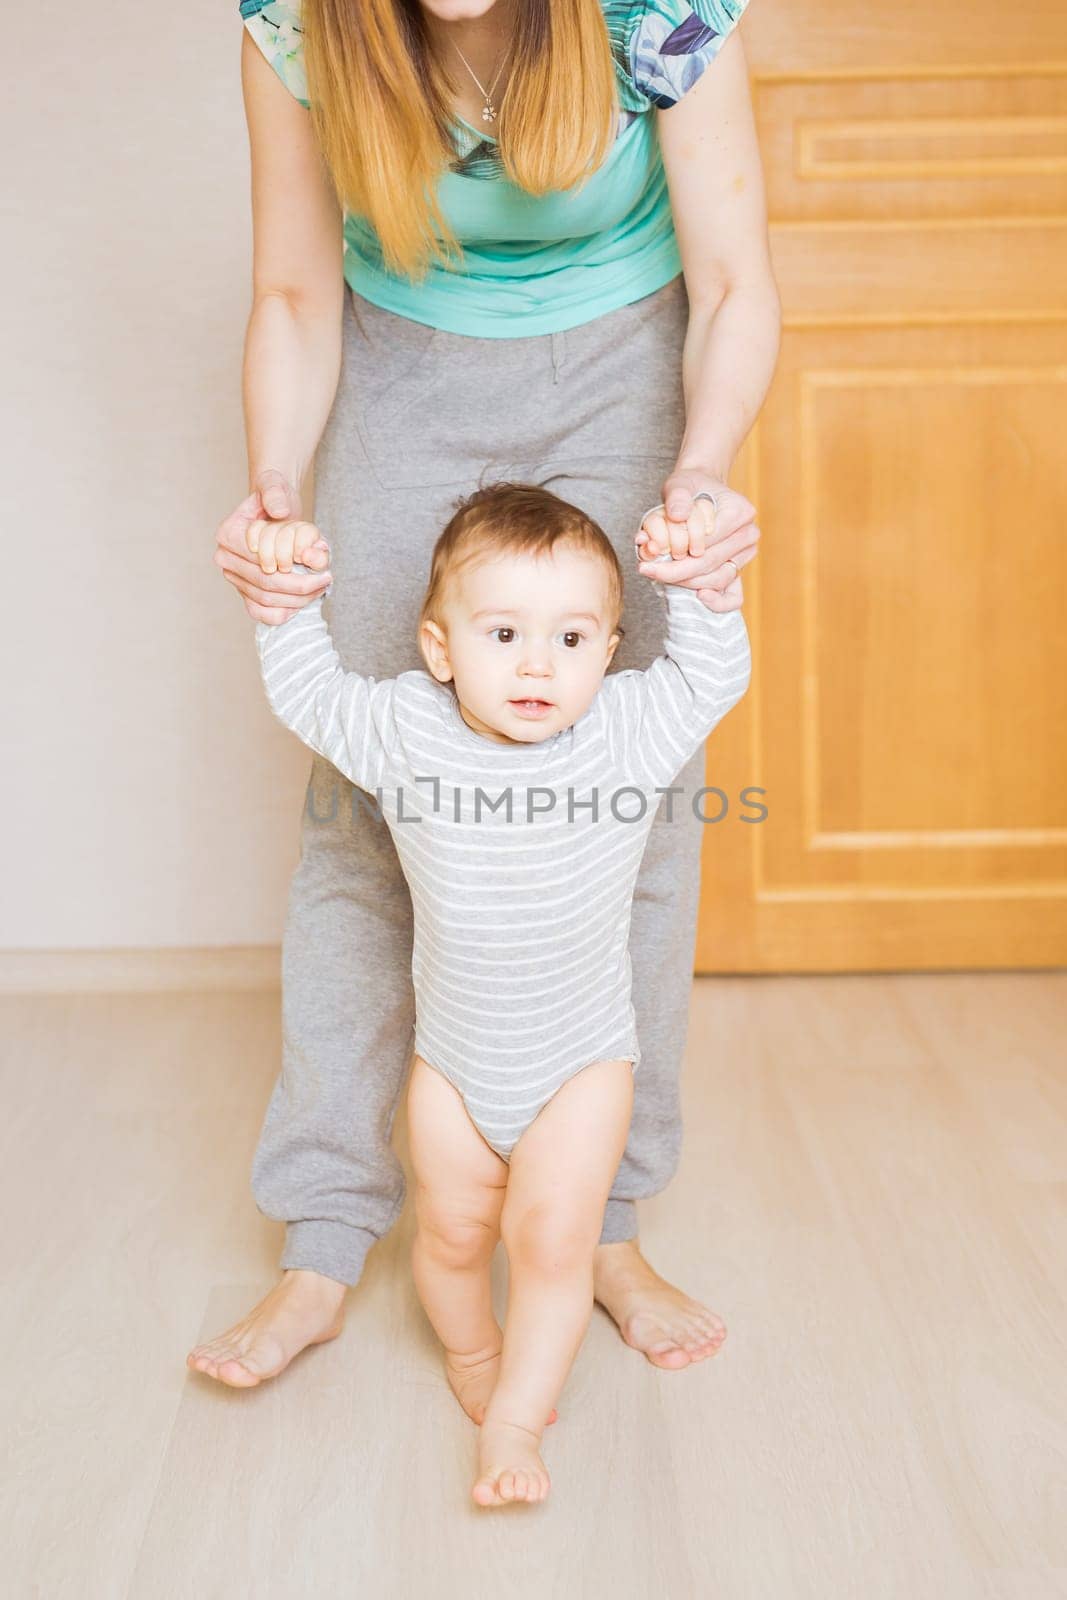 little boy first steps with the help of mother by Satura86